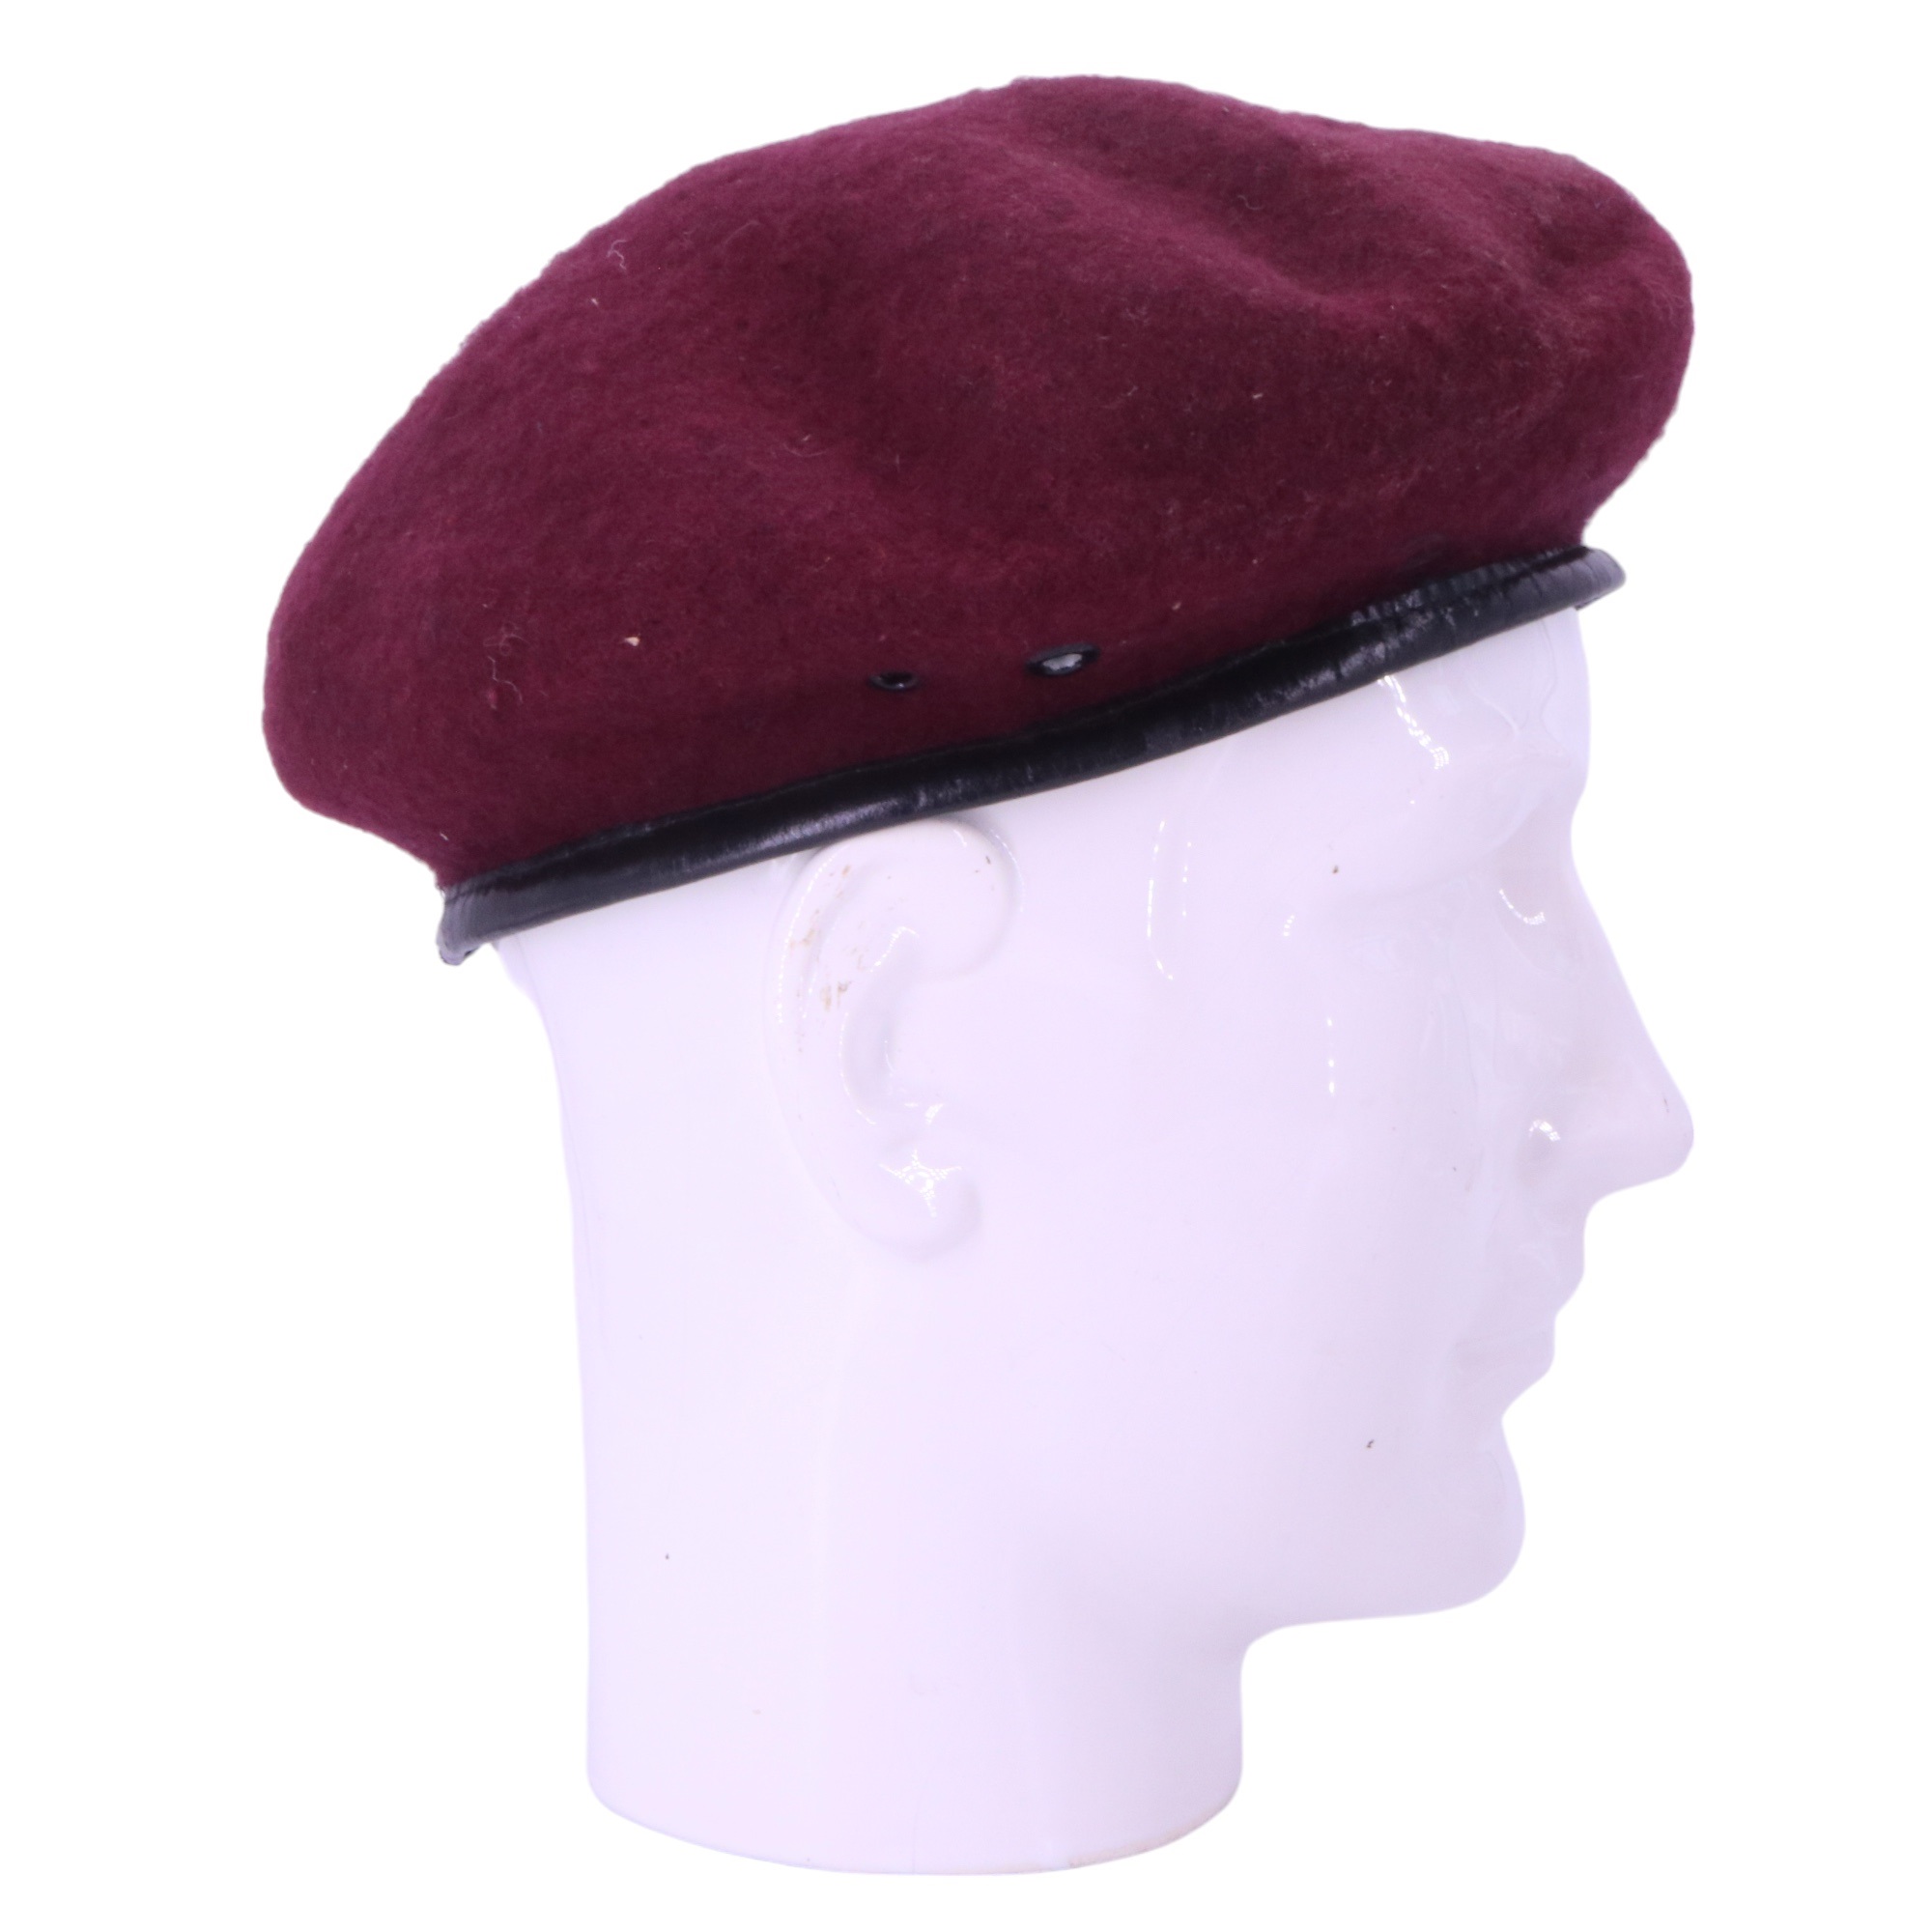 A post-1952 Parachute Regiment beret together with anodised aluminium Staybrite cap and collar - Image 6 of 8